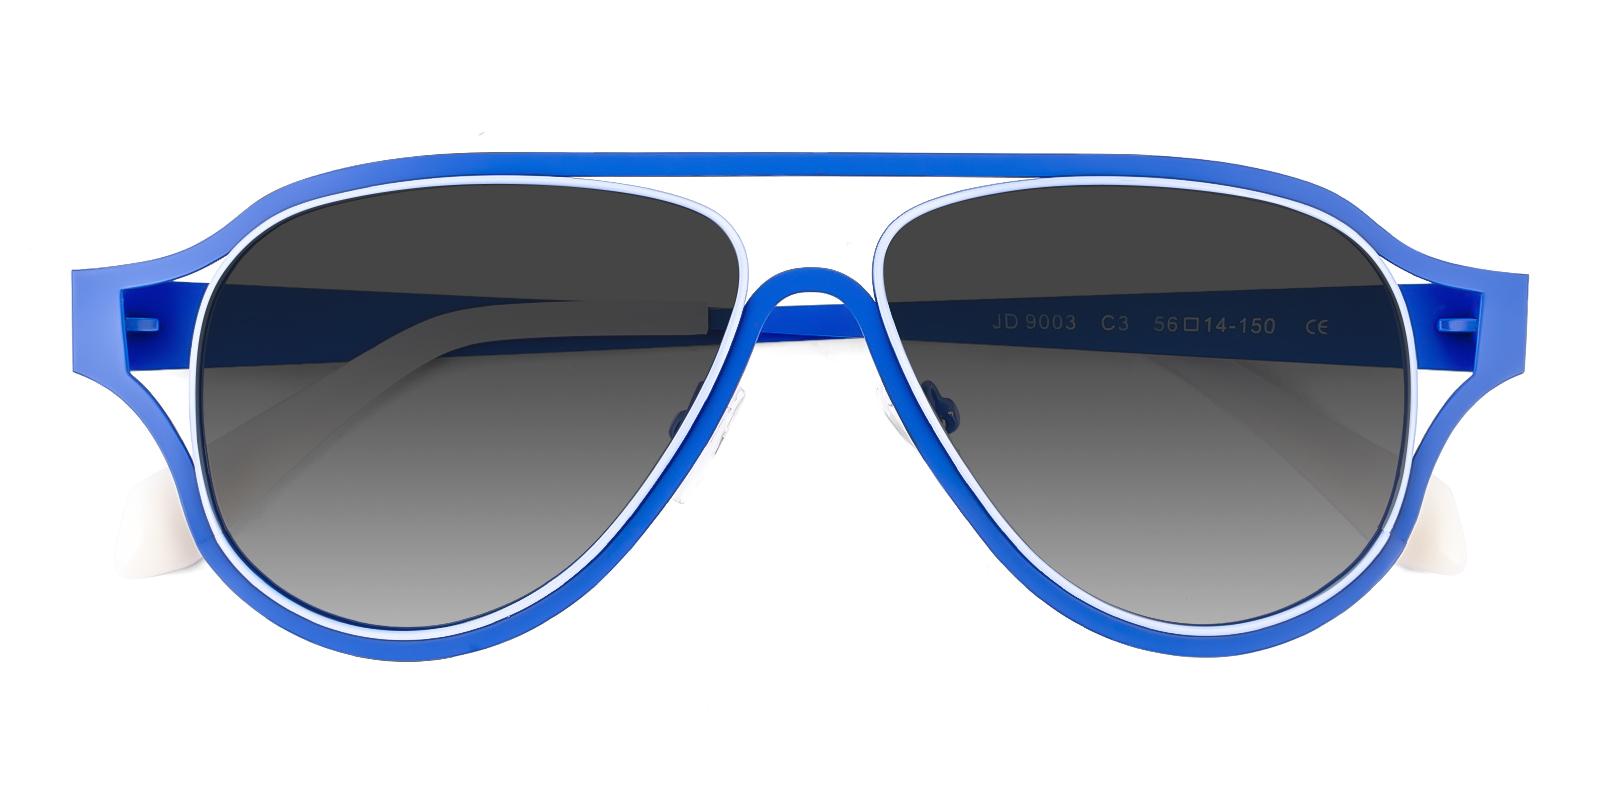 Sciation Blue Metal NosePads , Sunglasses Frames from ABBE Glasses